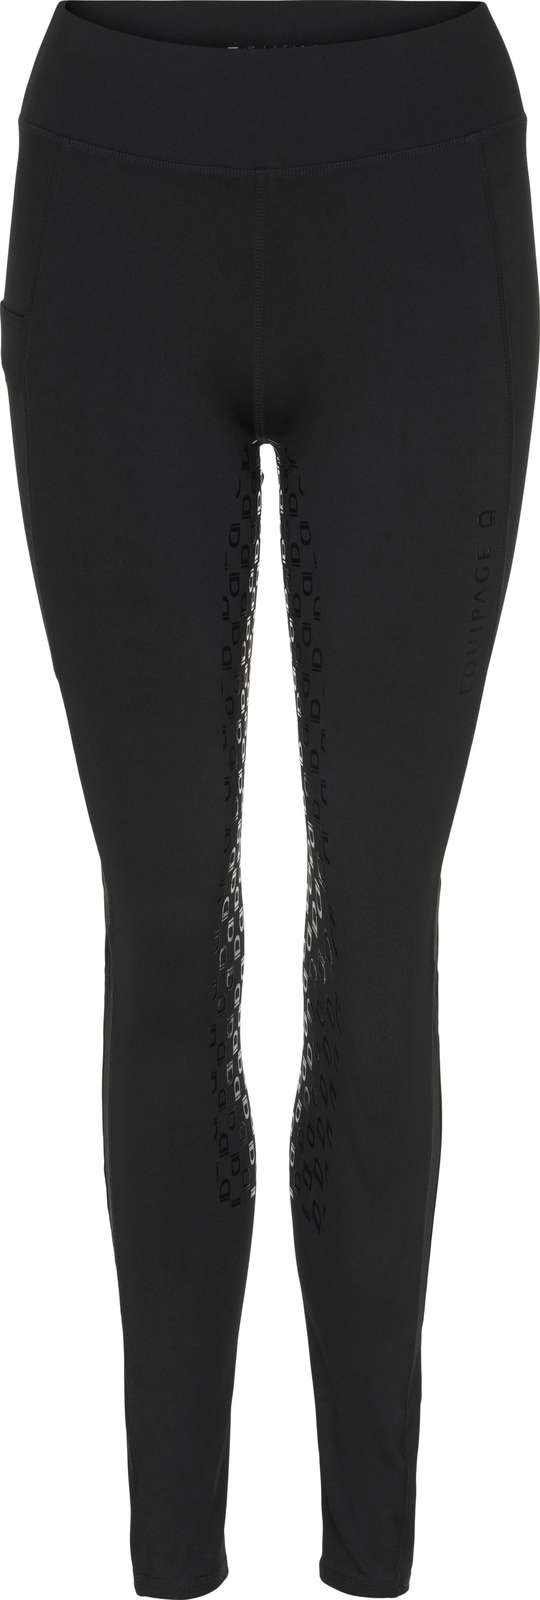 Equipage Finley Tights - Sort 